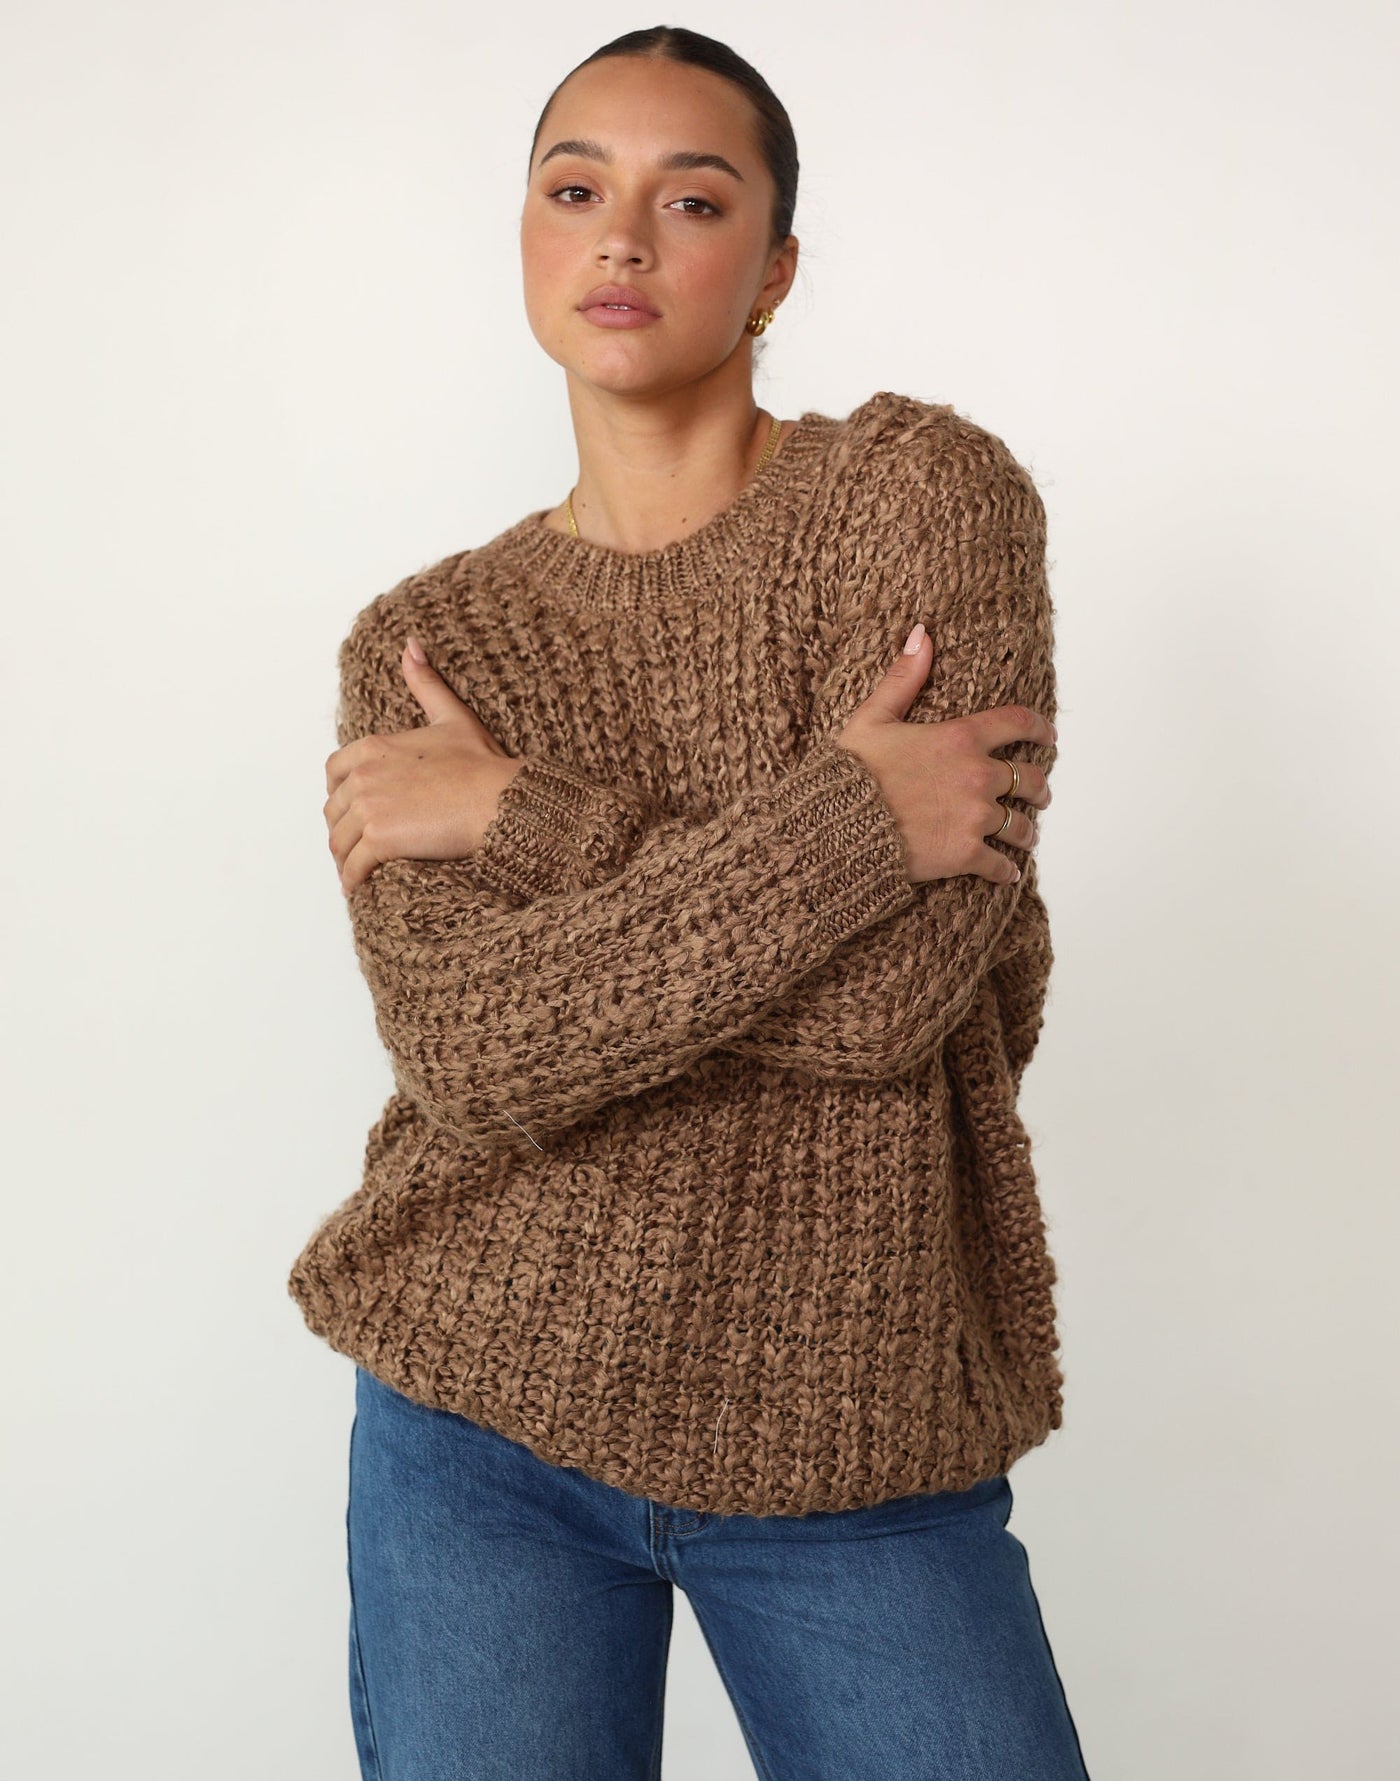 Emme Jumper (Taupe) - Relaxed Fit High Crew Neck Knit Jumper - Women's Tops - Charcoal Clothing